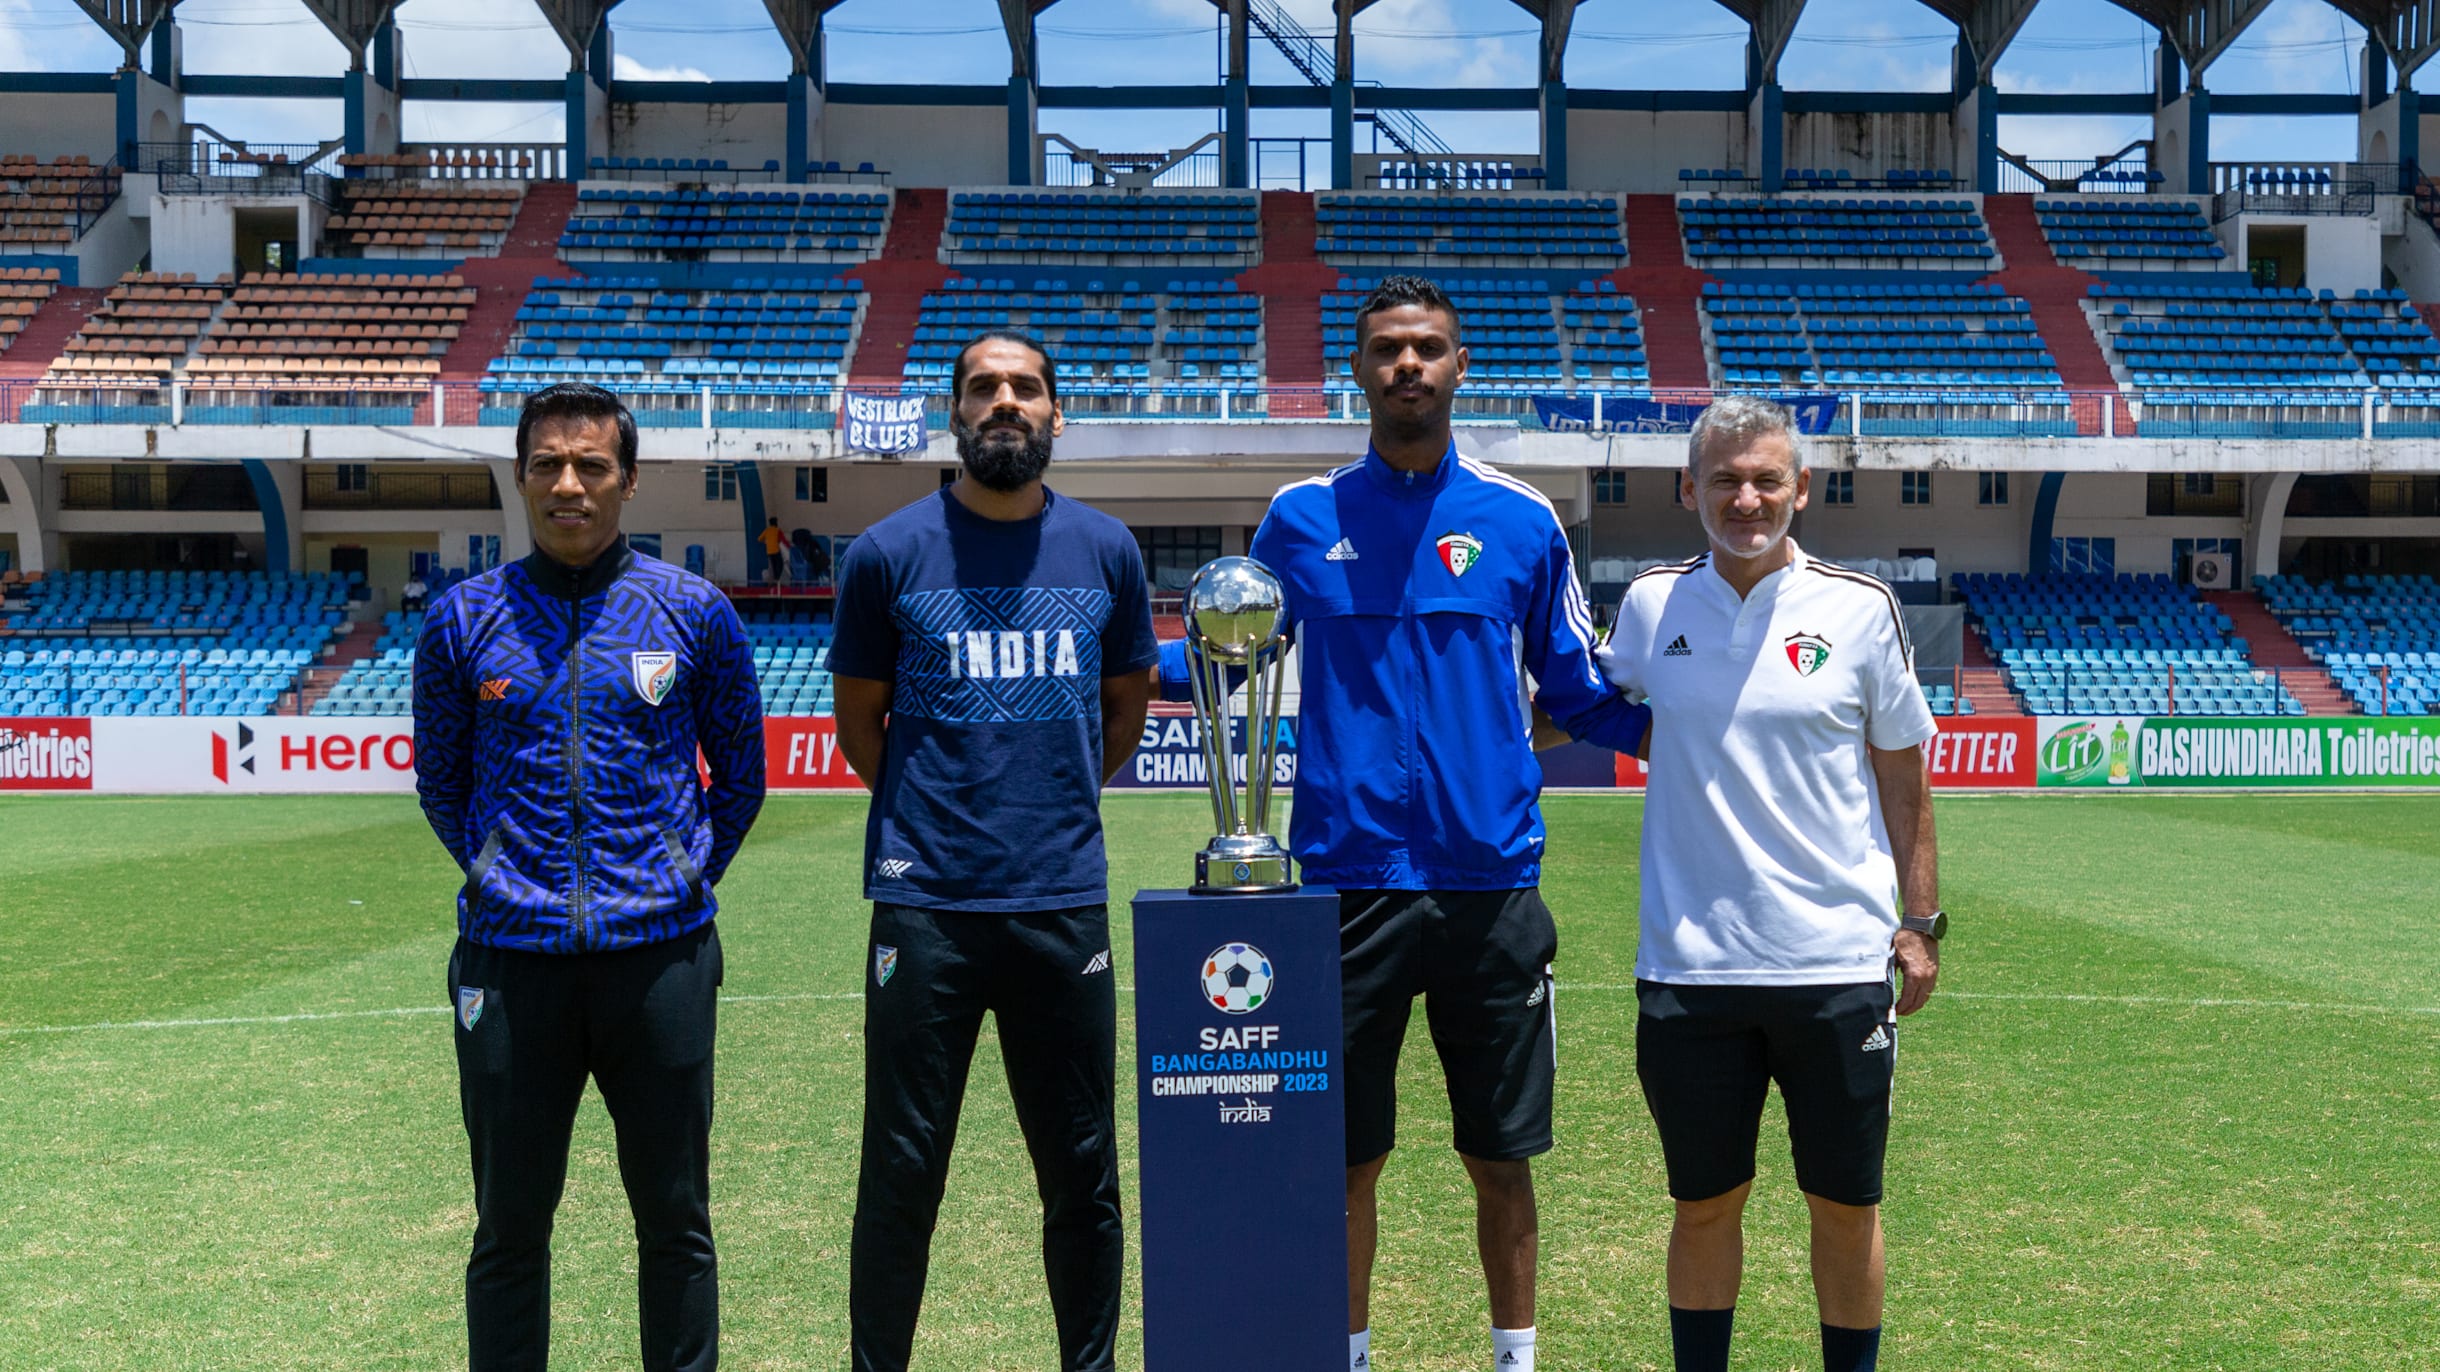 India vs Kuwait football, SAFF Championship 2023 final Know match schedule and where to watch live streaming and telecast